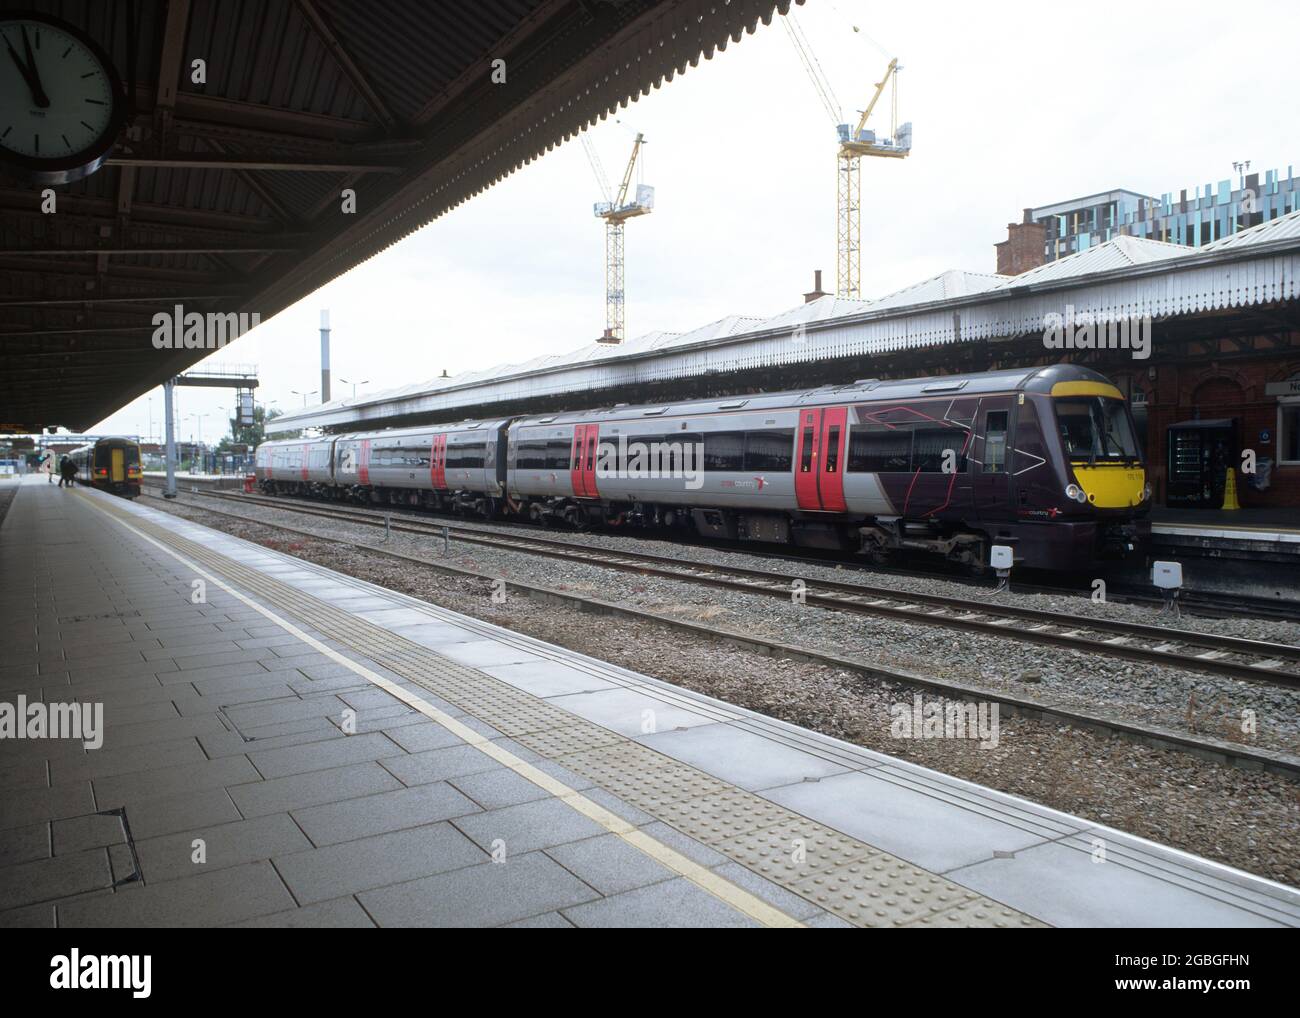 Nottingham, UK - 10 July 2021: A diesel passenger train (Class 170) operated by CrossCountry at Nottingham station. Stock Photo